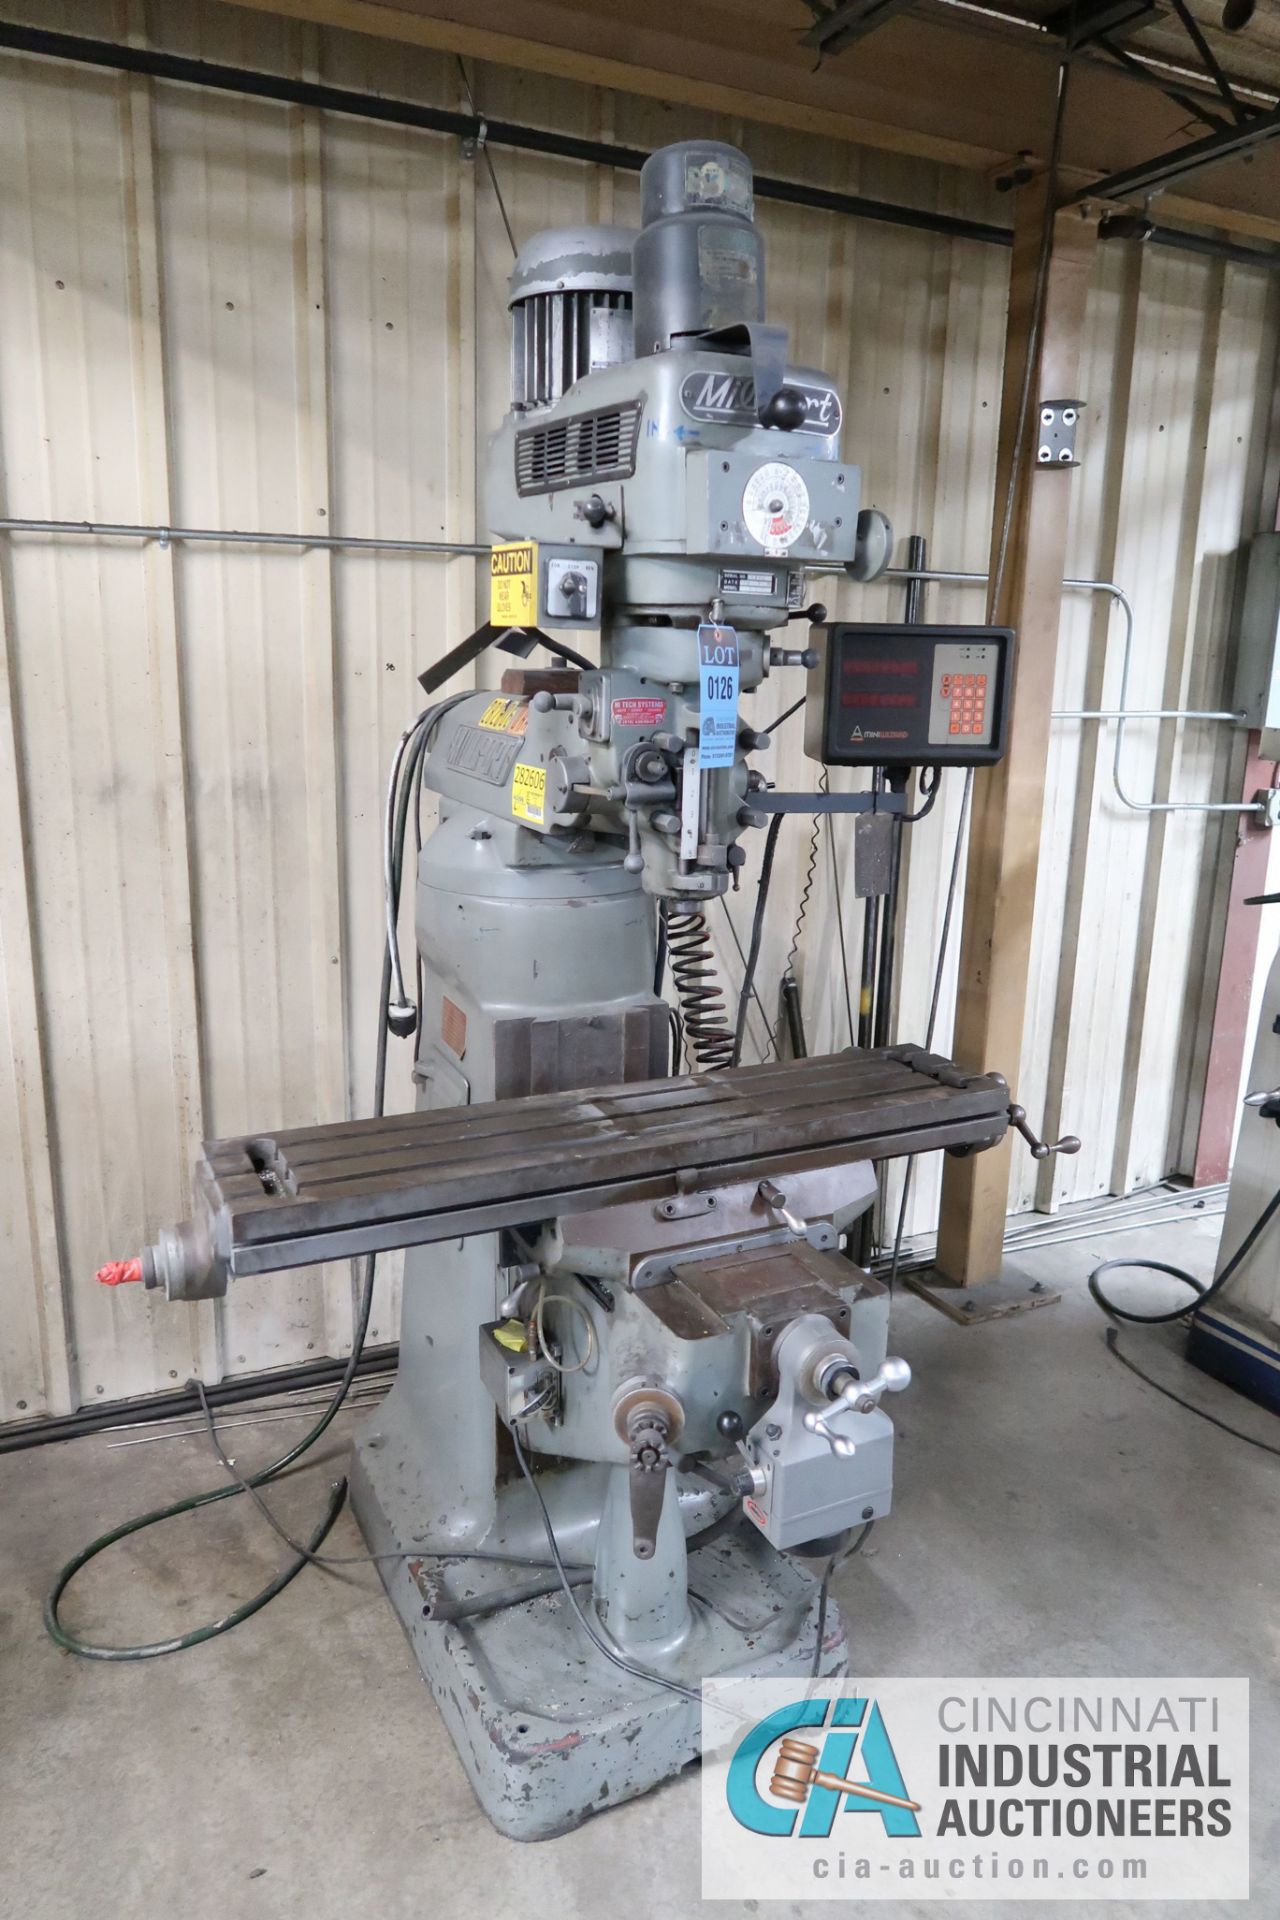 3 HP MILLPORT MODEL 3VH VERTICAL MILLING MACHINE; S/N 85303 WITH MINI WIZARD DRO, 60-4,250 SPINDLE